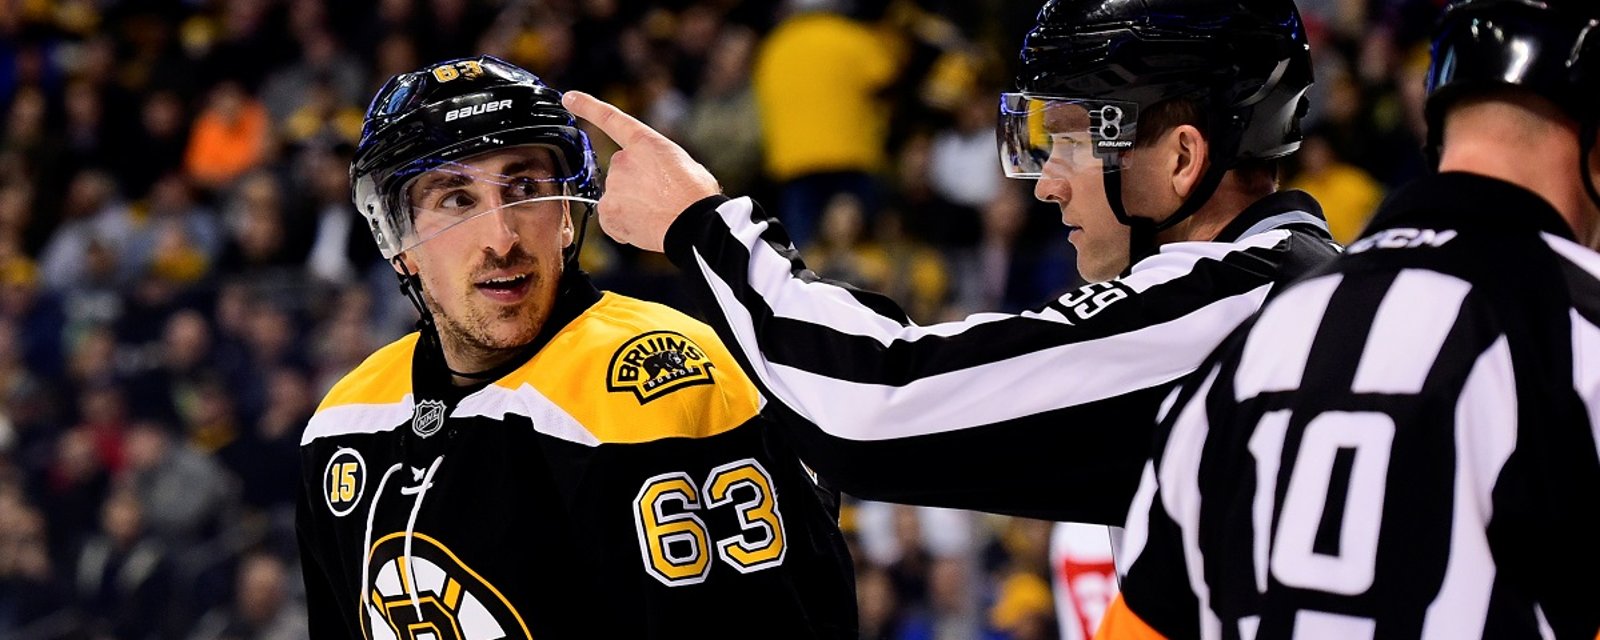 Brad Marchand robbed of a goal by the NHL officials!